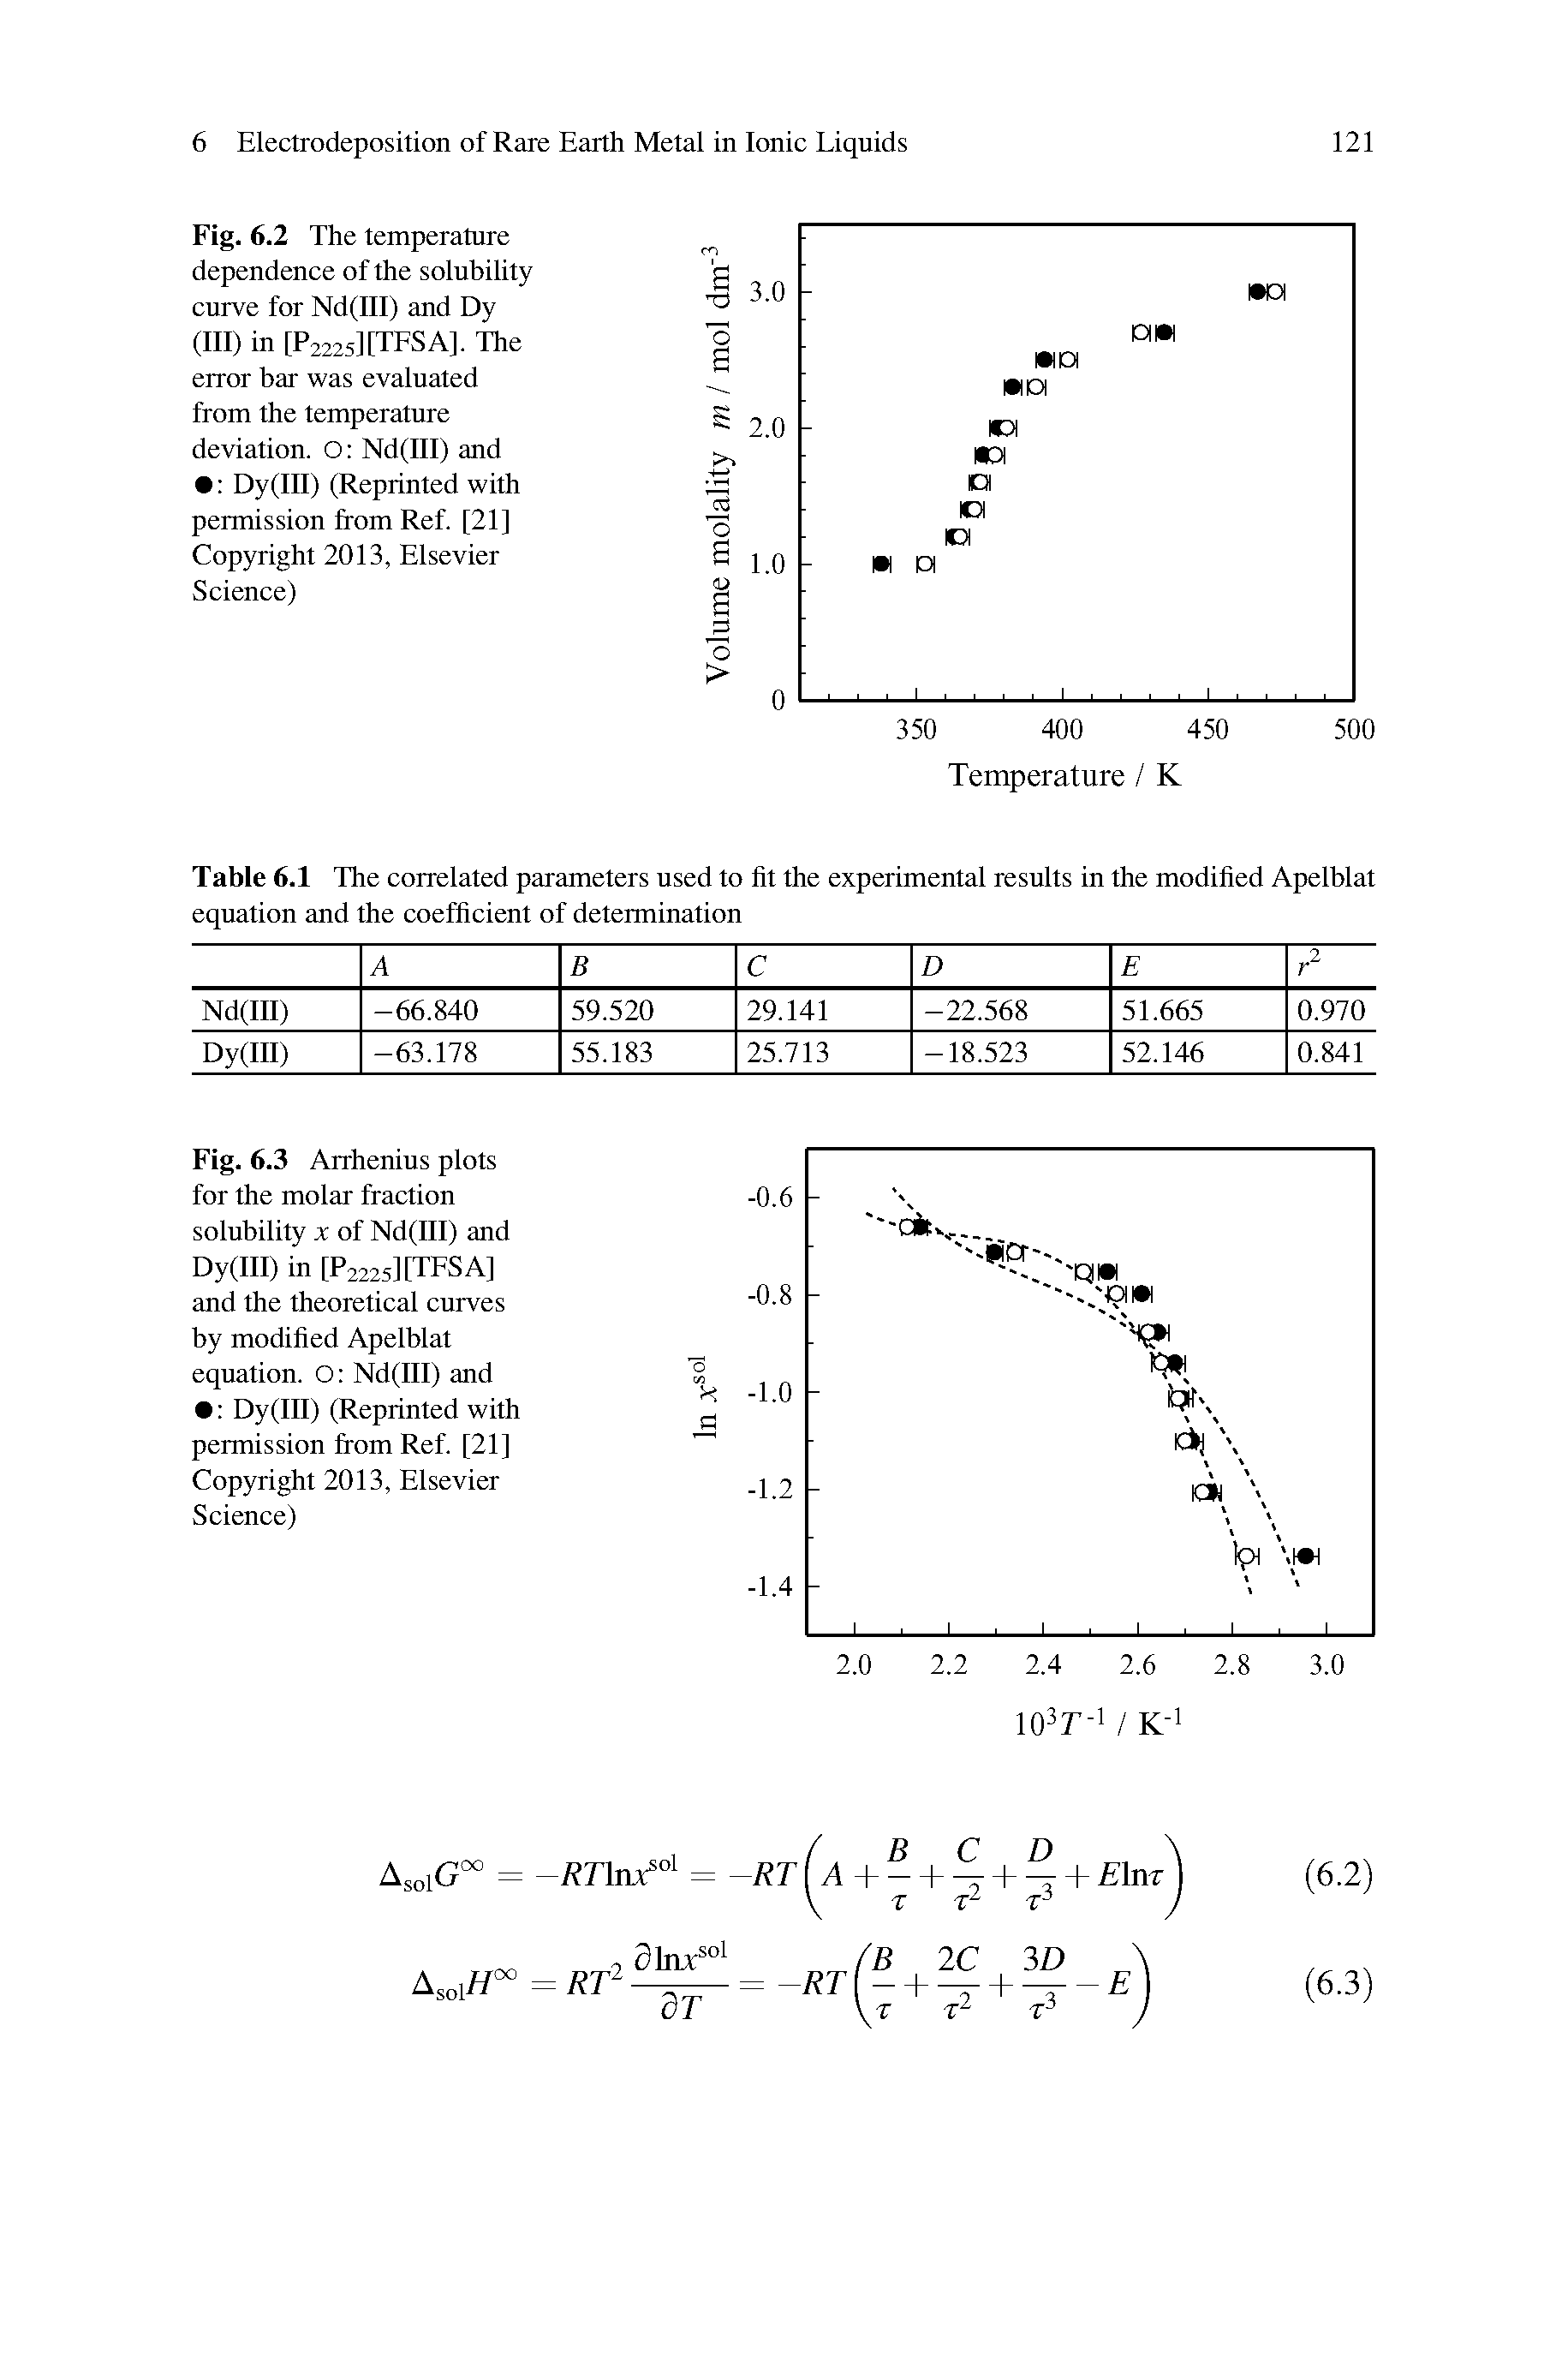 Fig. 6.3 Arrhenius plots for the molar fraction solubility x of Nd(III) and Dy(III) in [P2225][TESA] and the theoretical curves by modified Apelblat equation. O Nd(III) and Dy(III) (Reprinted with permission from Ref. [21] Copyright 2013, Elsevier Science)...